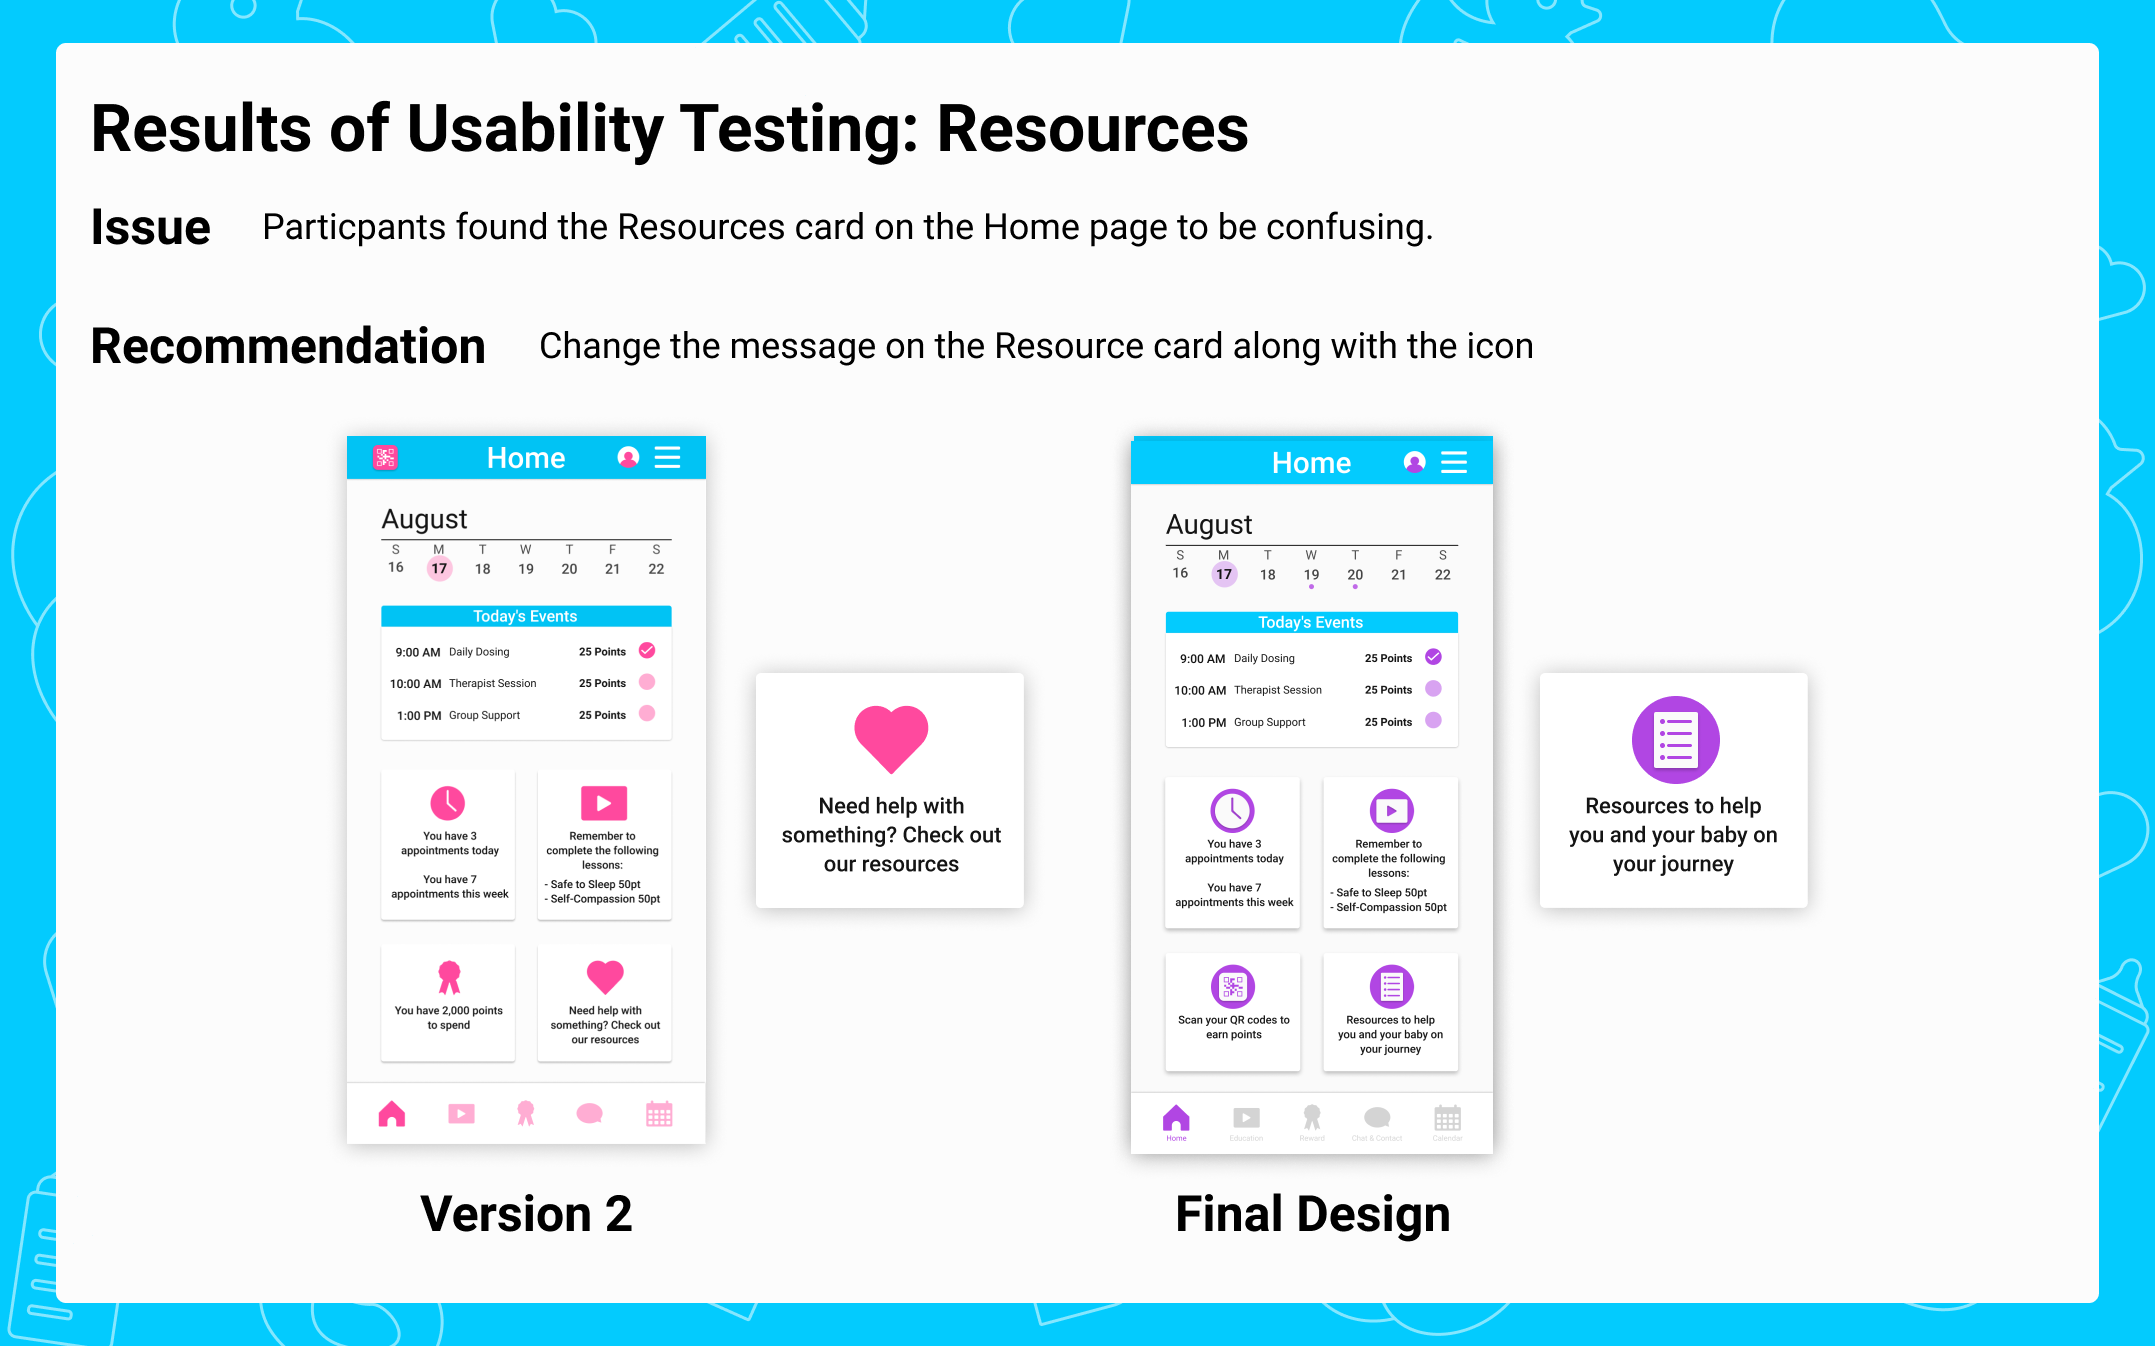 Image of a usability testing results for Safe4Both